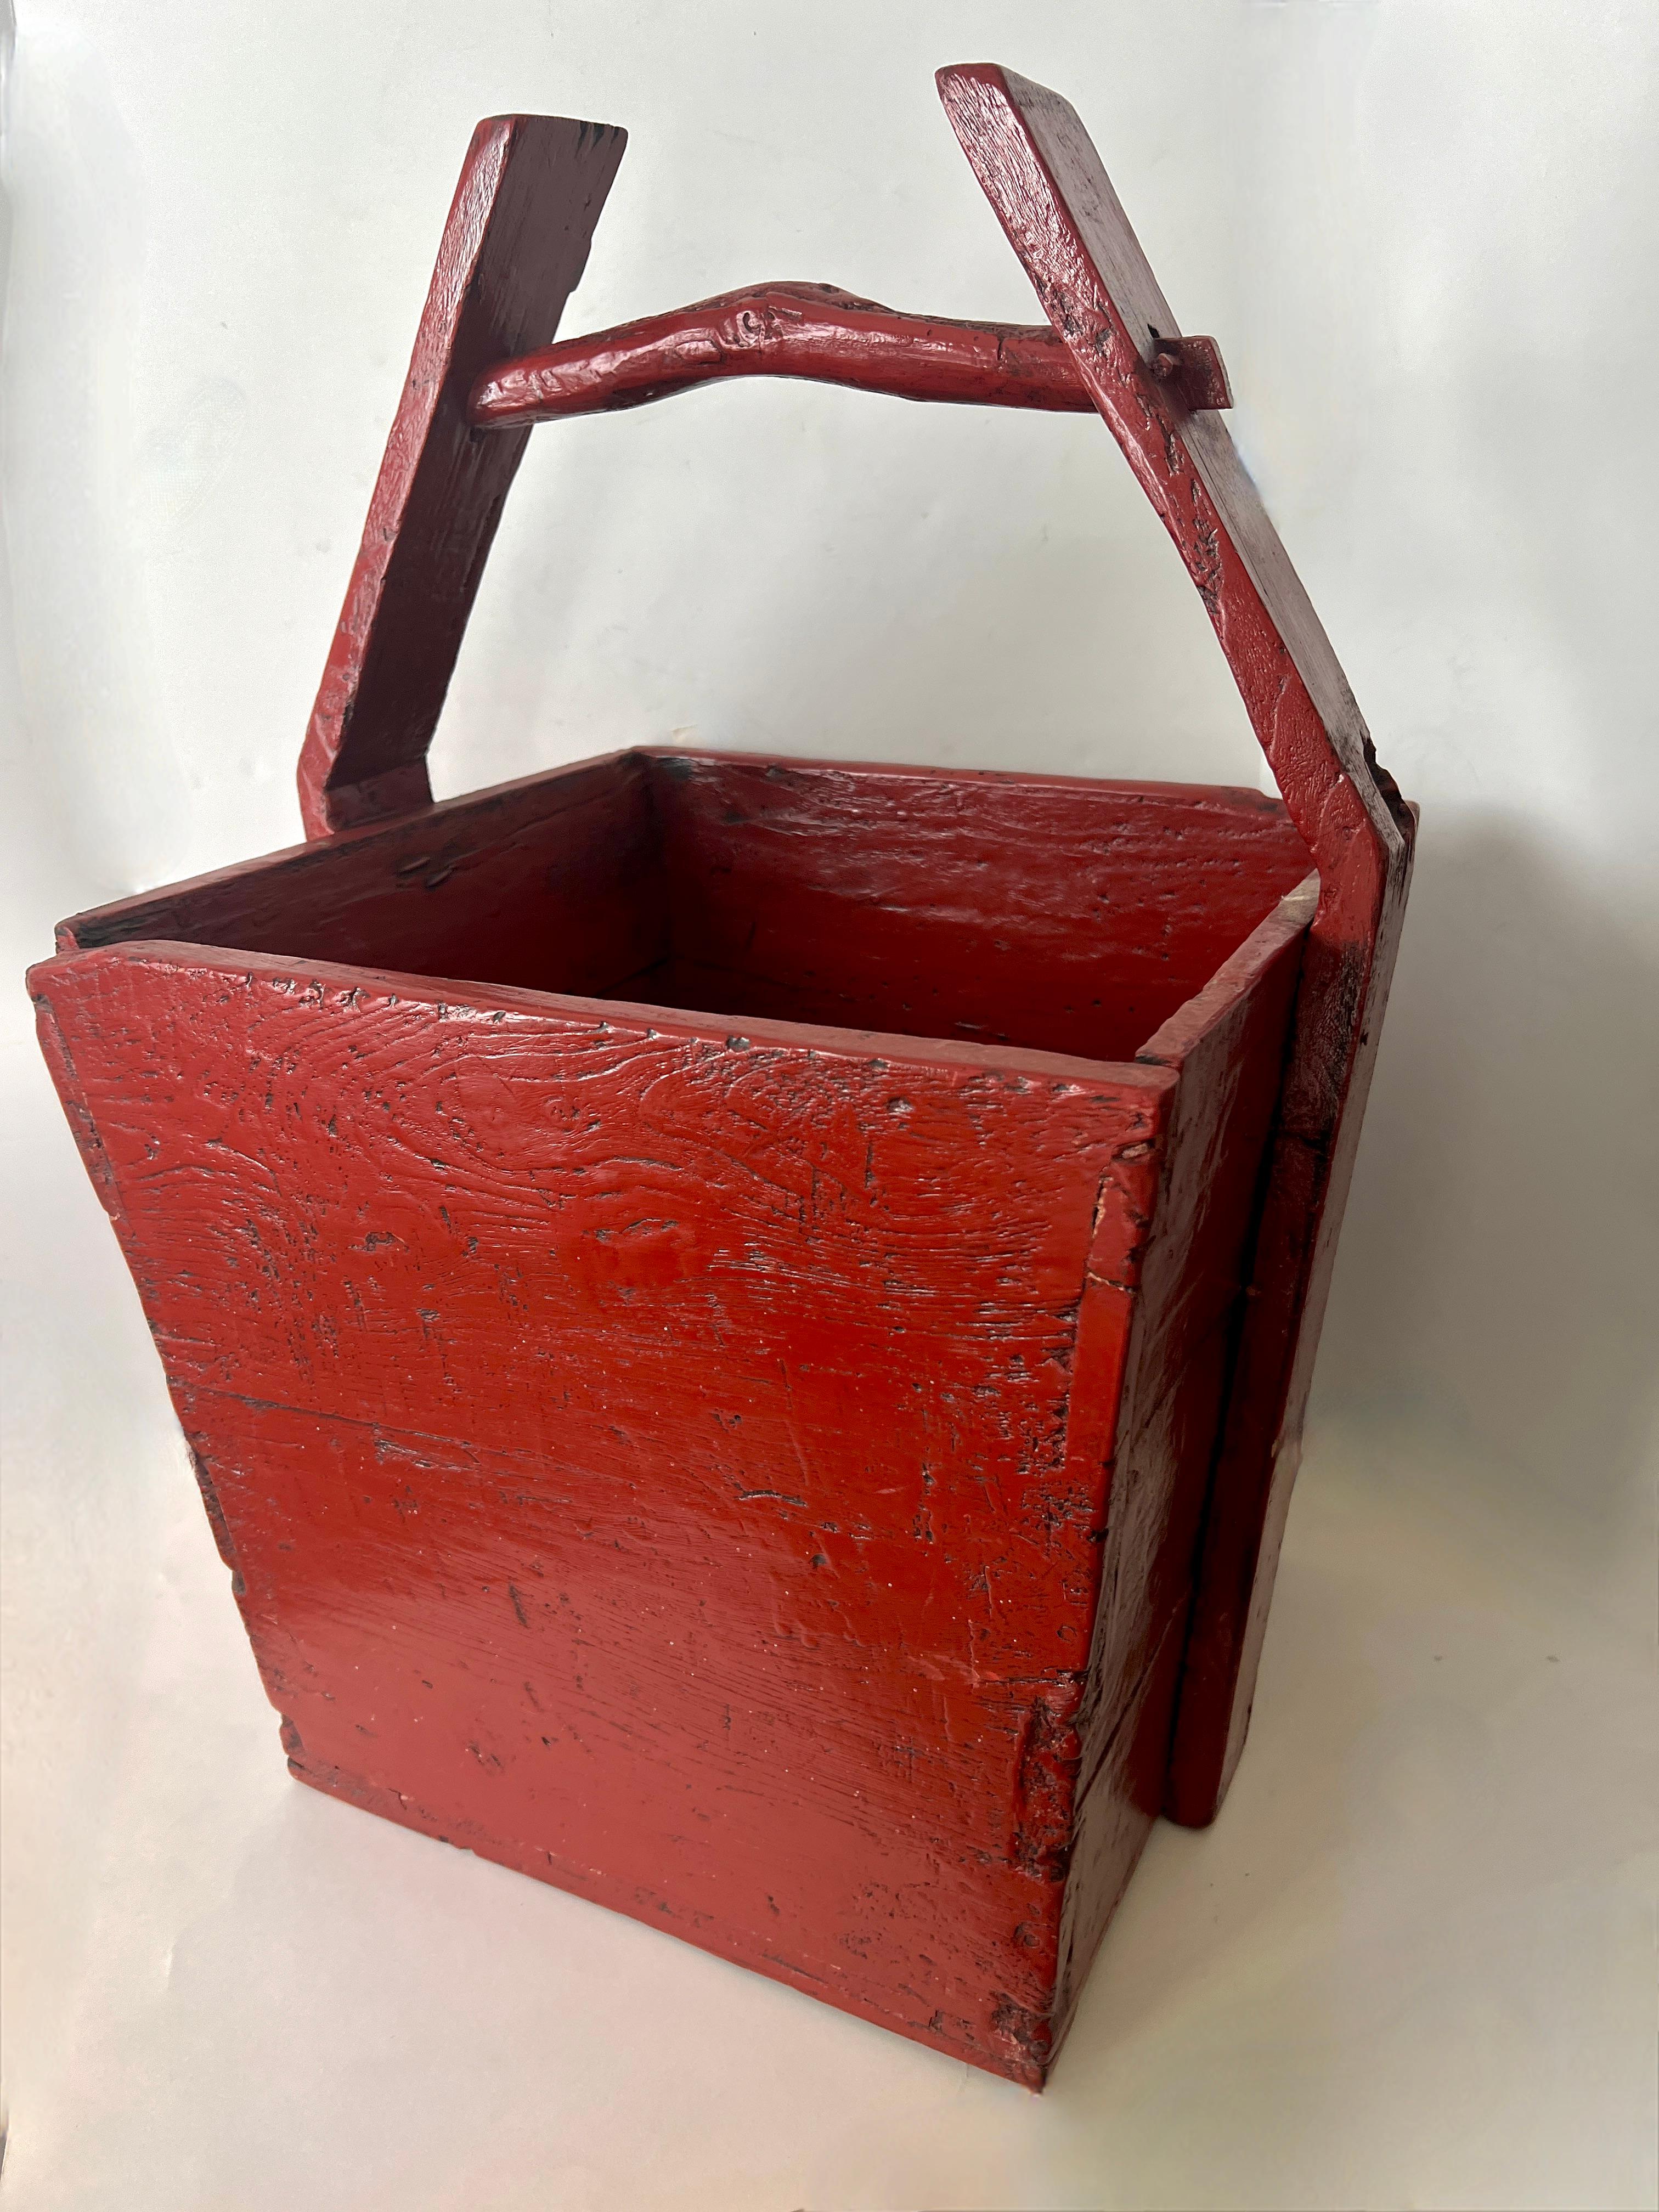 A Wooden and very beautiful Antique Rice Carrier that it lacquered in red.

The piece is a compliment to many settings and spaces.  This could be used as a planter, centerpiece, under a console, in a bathroom holding towels or next to the fireplace